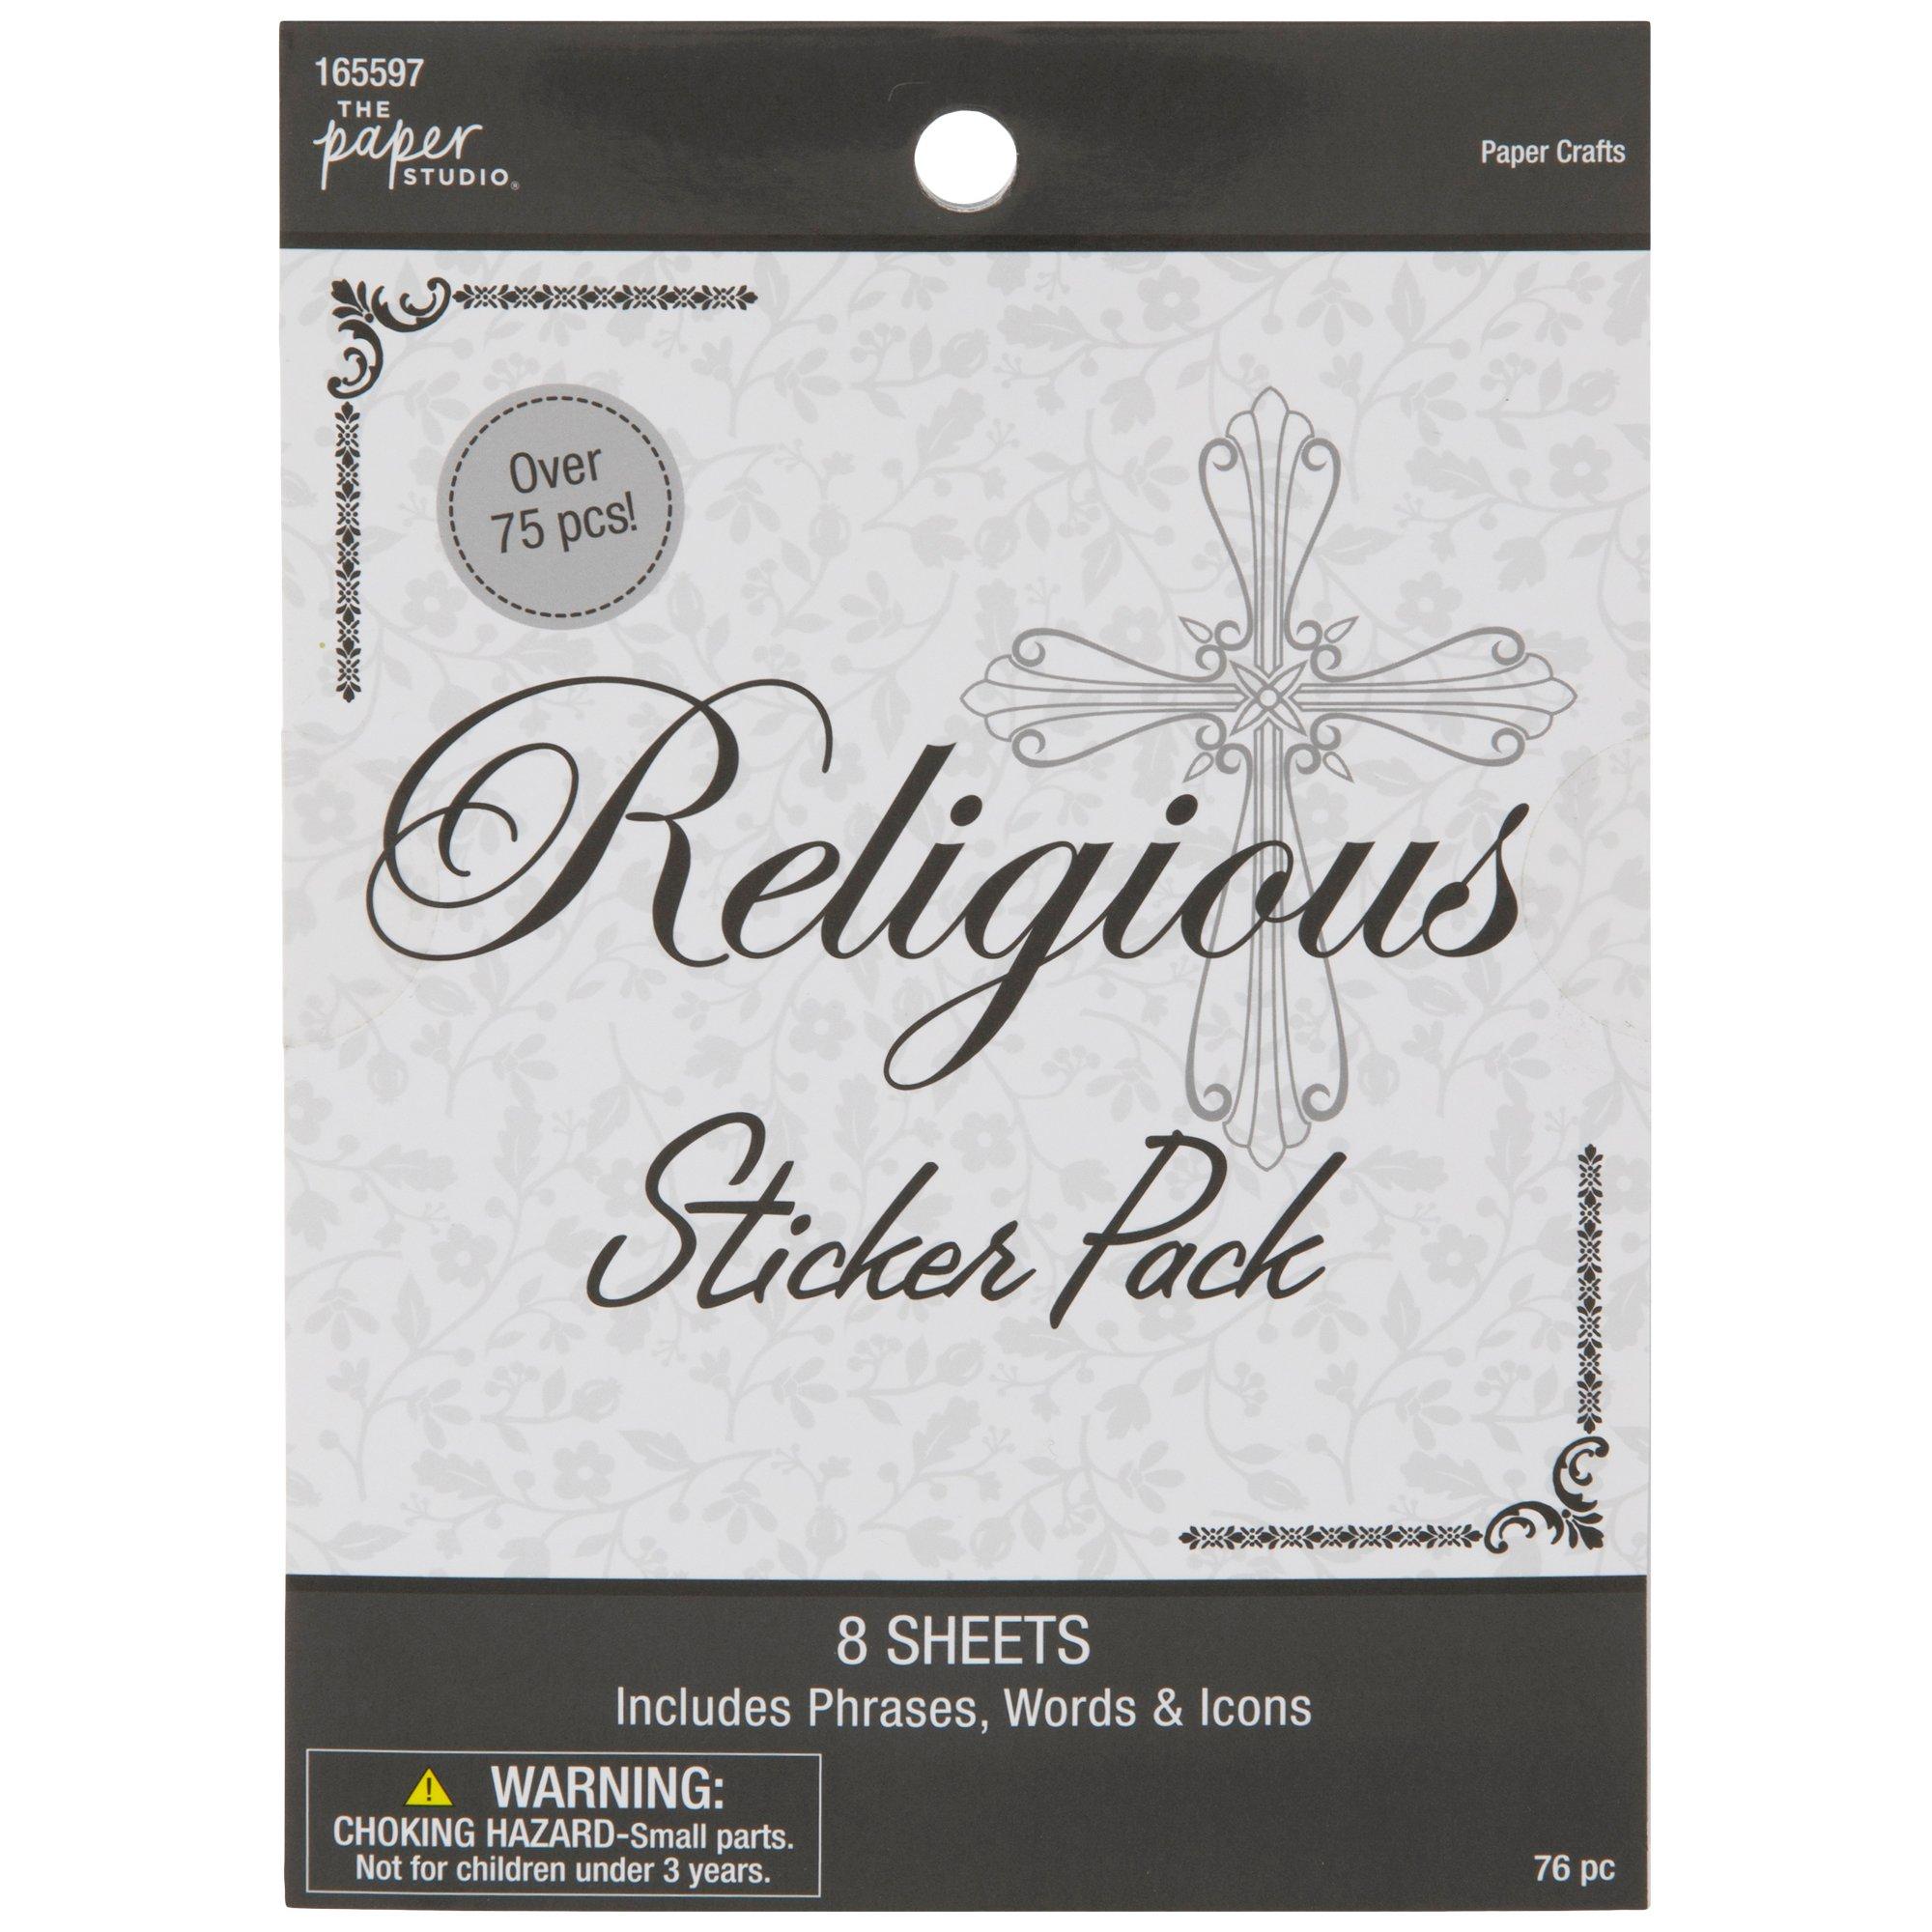 Christian Sticker Pack, Six Faith Stickers, Religious Decals, Bible Ve –  Designs by Stacey Lynn